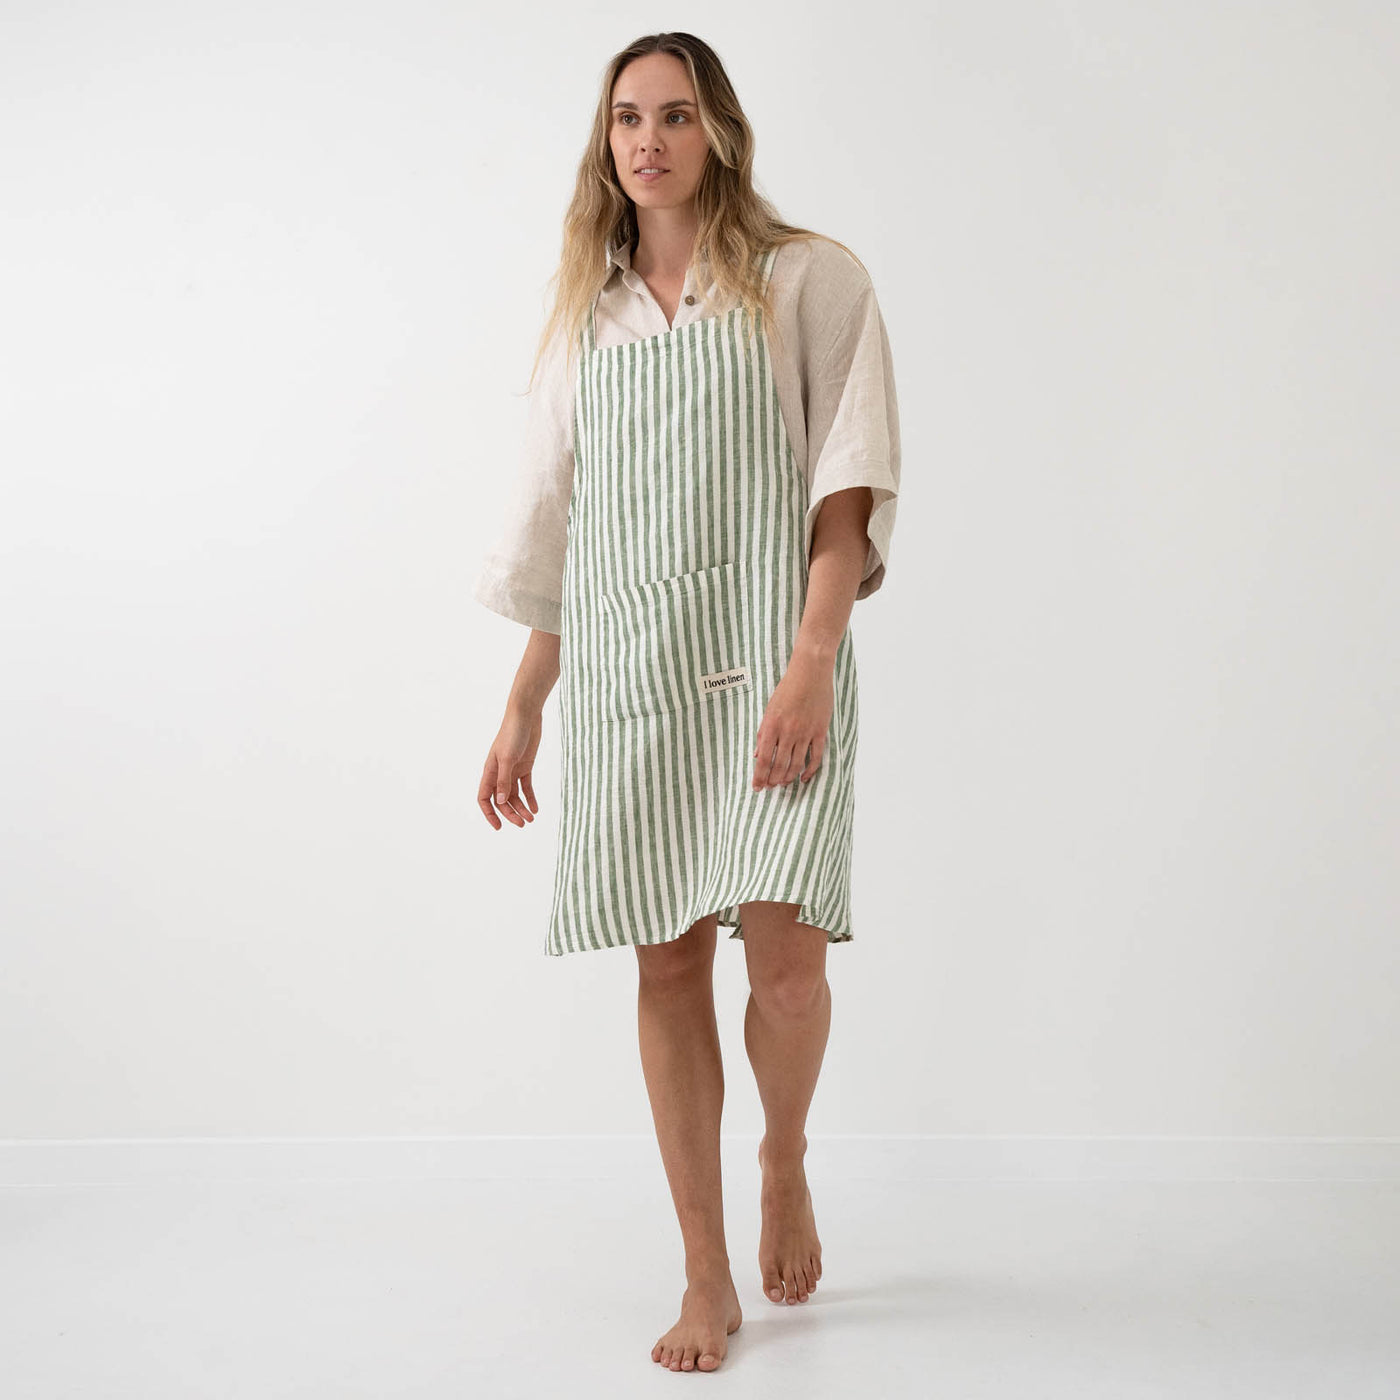 French Flax Linen Apron in Ivy Stripe